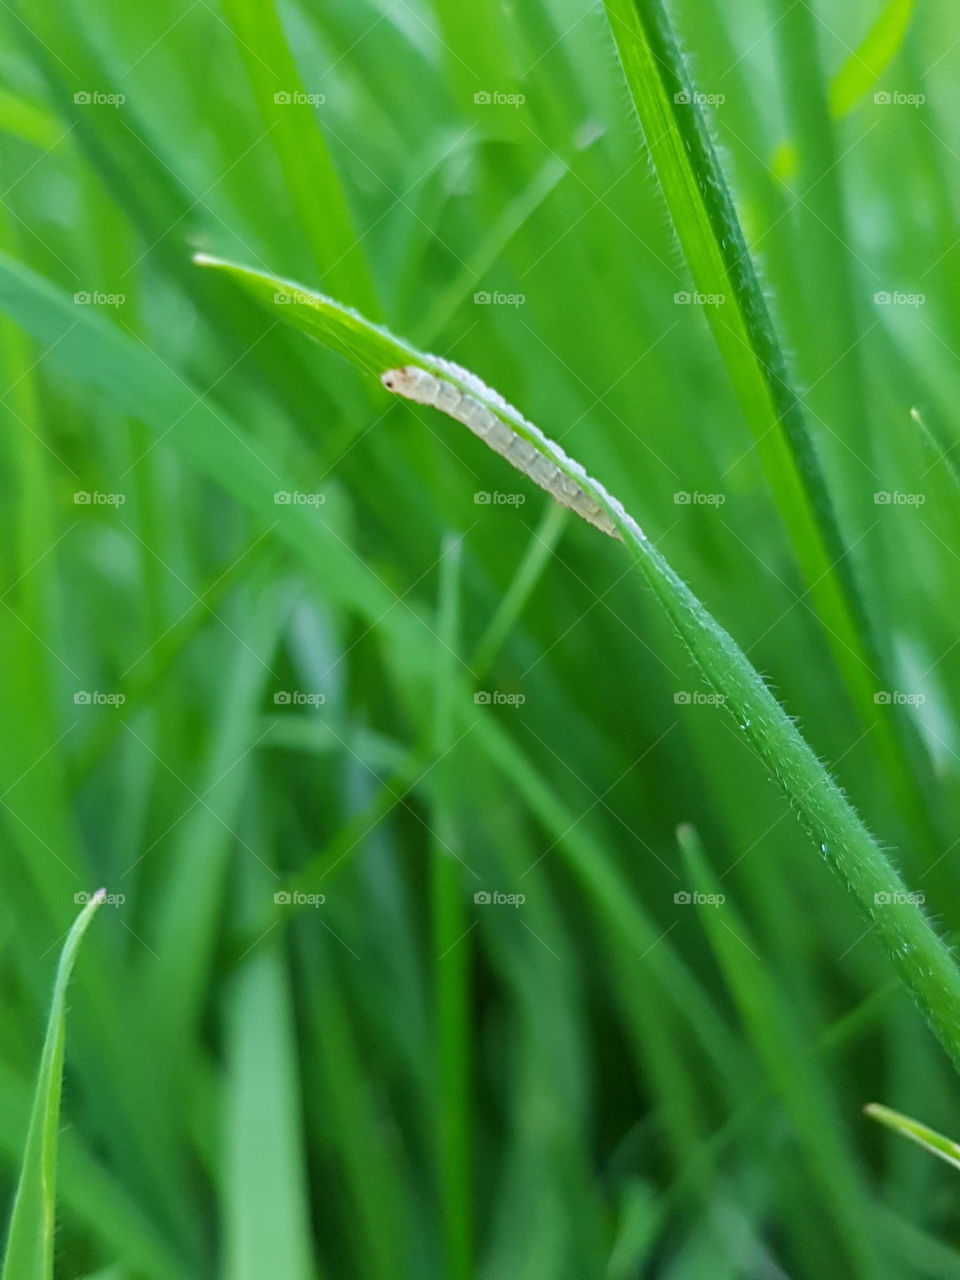 Insect on a blade of grass close up